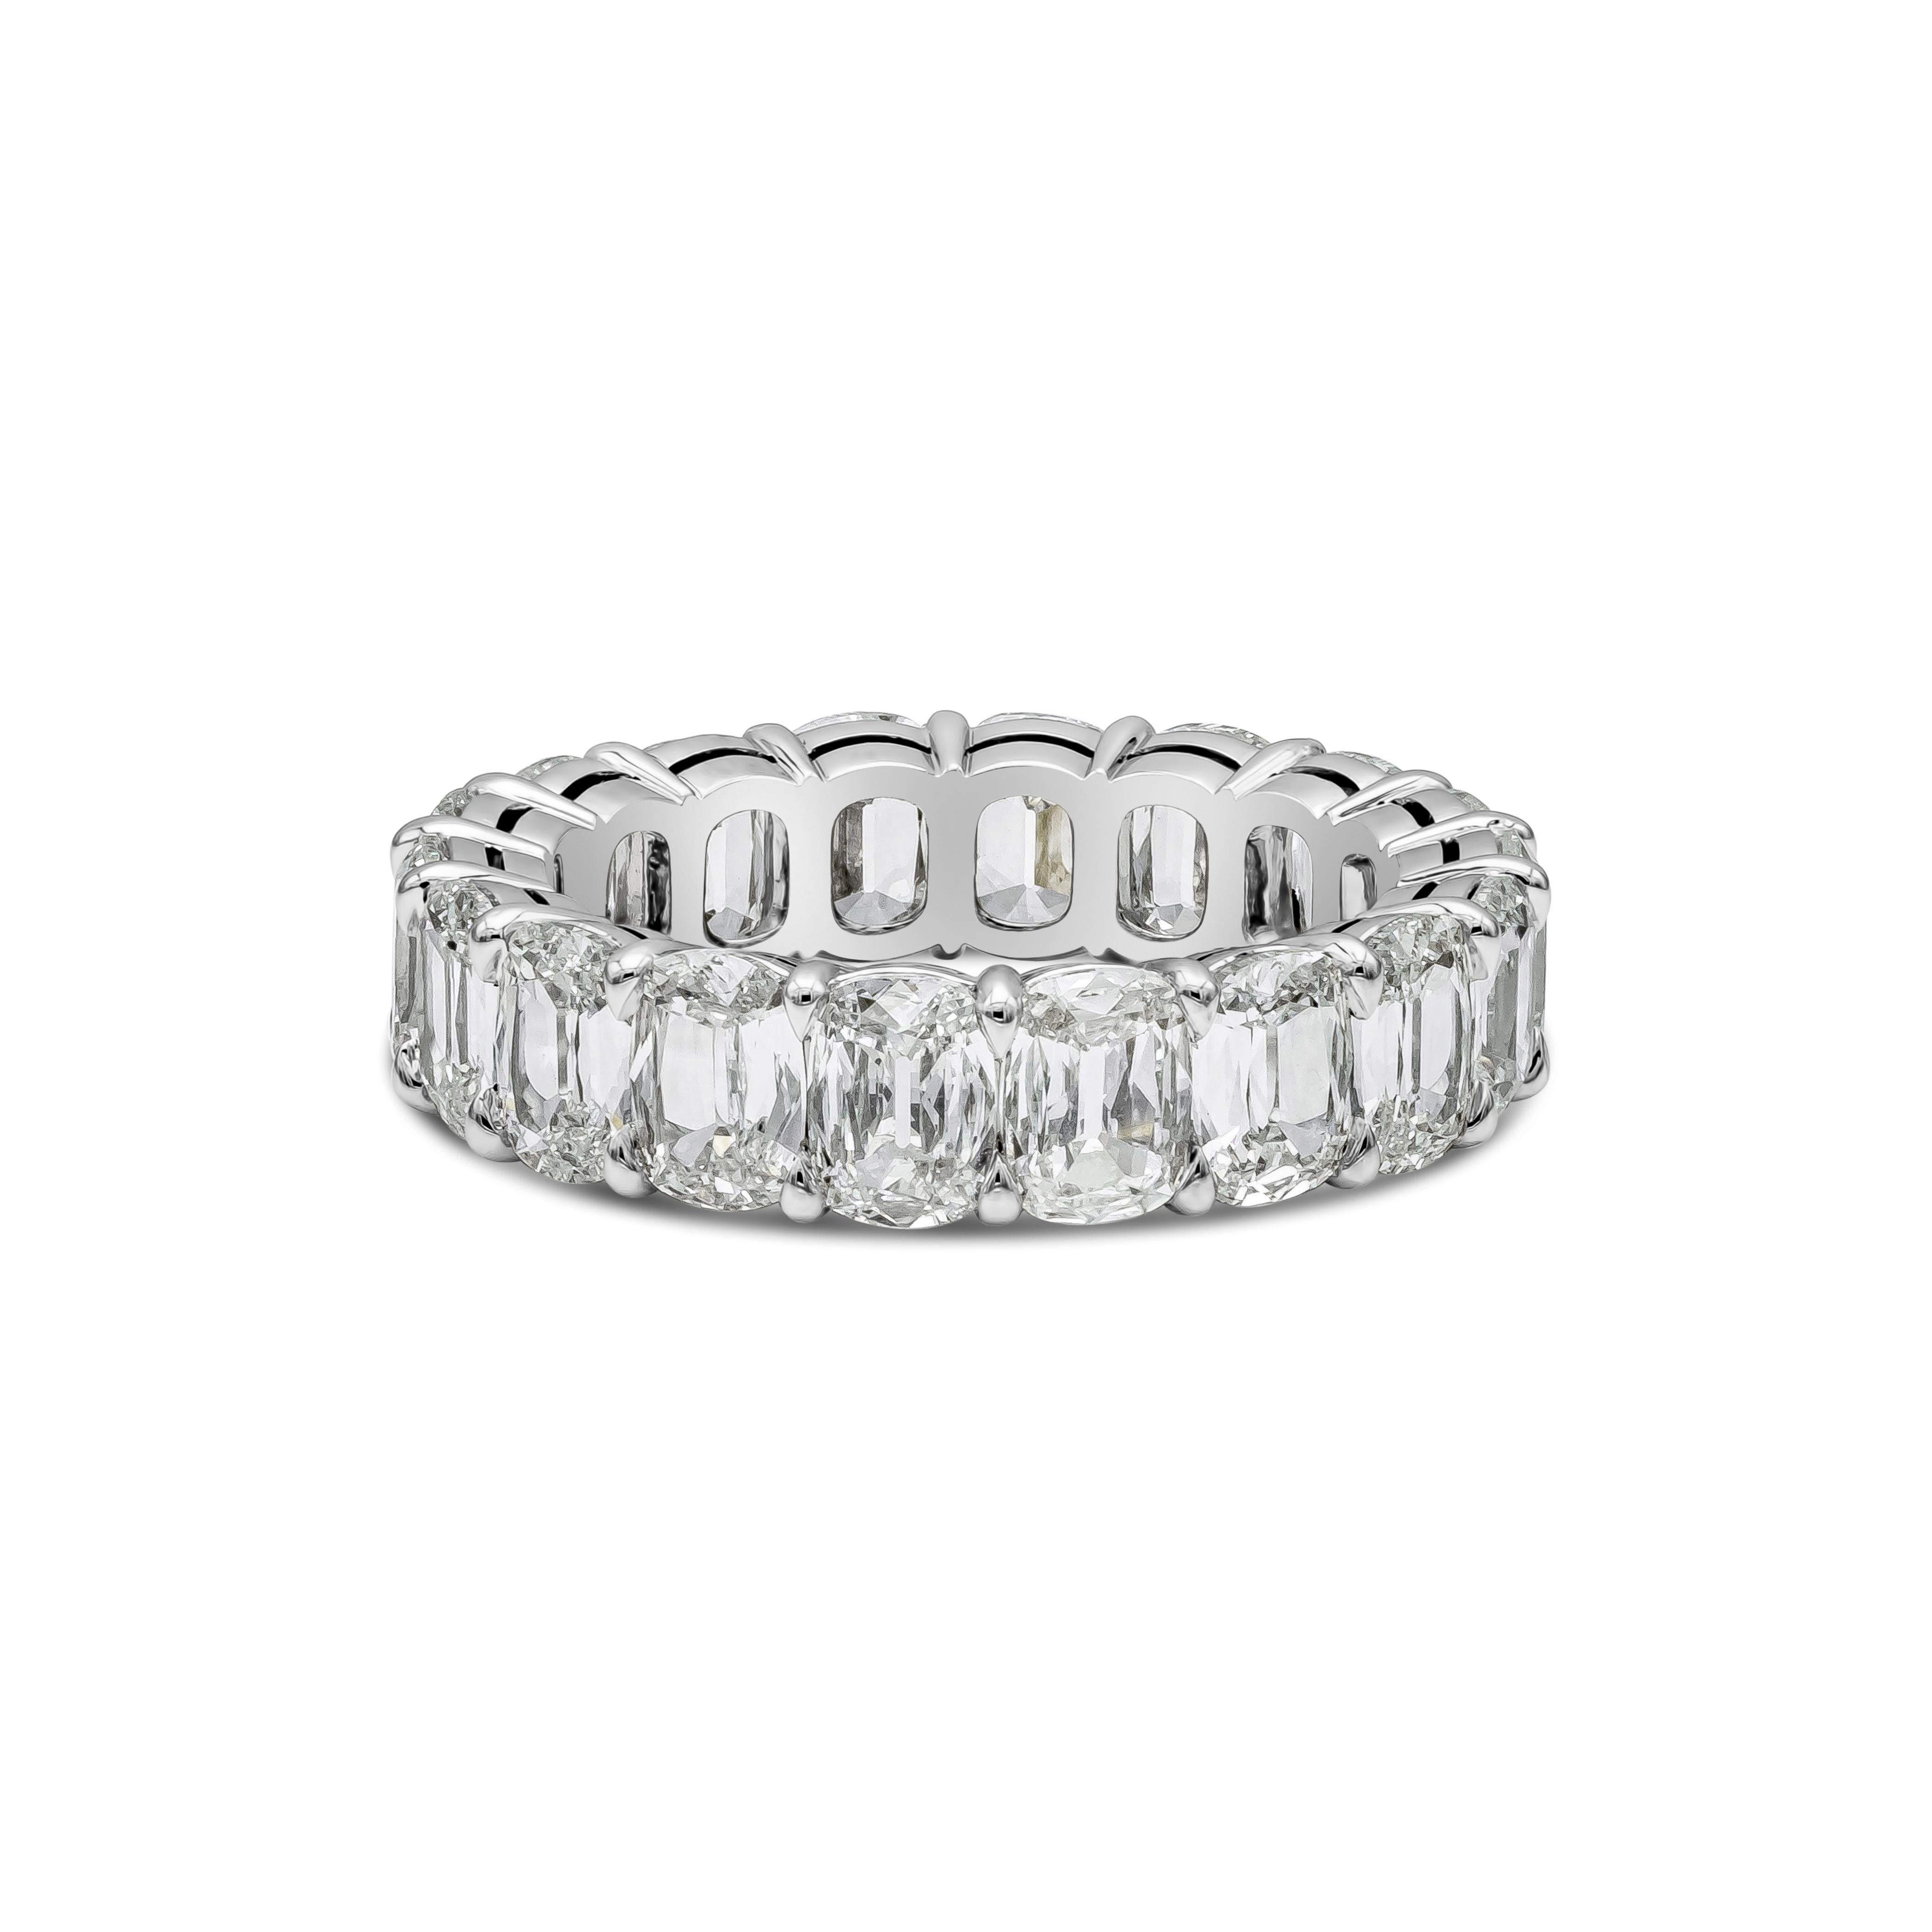 A classic and fine quality eternity wedding band handcrafted by Roman Malakov Diamonds in New York City. Showcasing 18 perfectly matched brilliant cushion cut diamonds weighing 5.66 carats total, set in an open-gallery style mounting made in